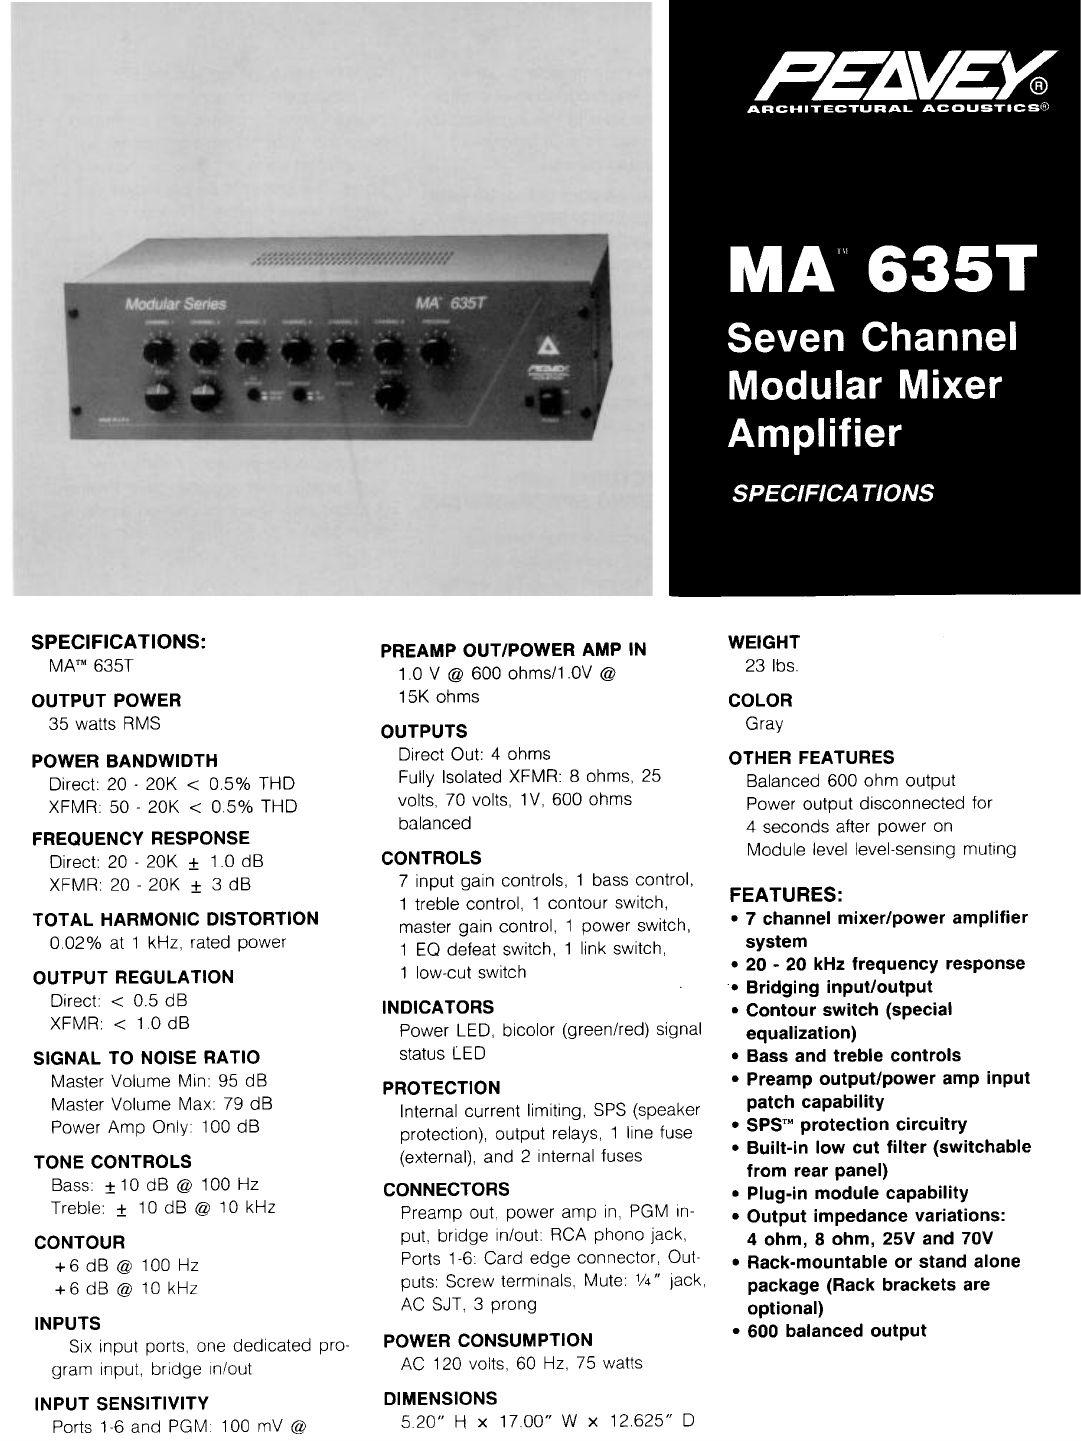 Switchmaster 300 manual